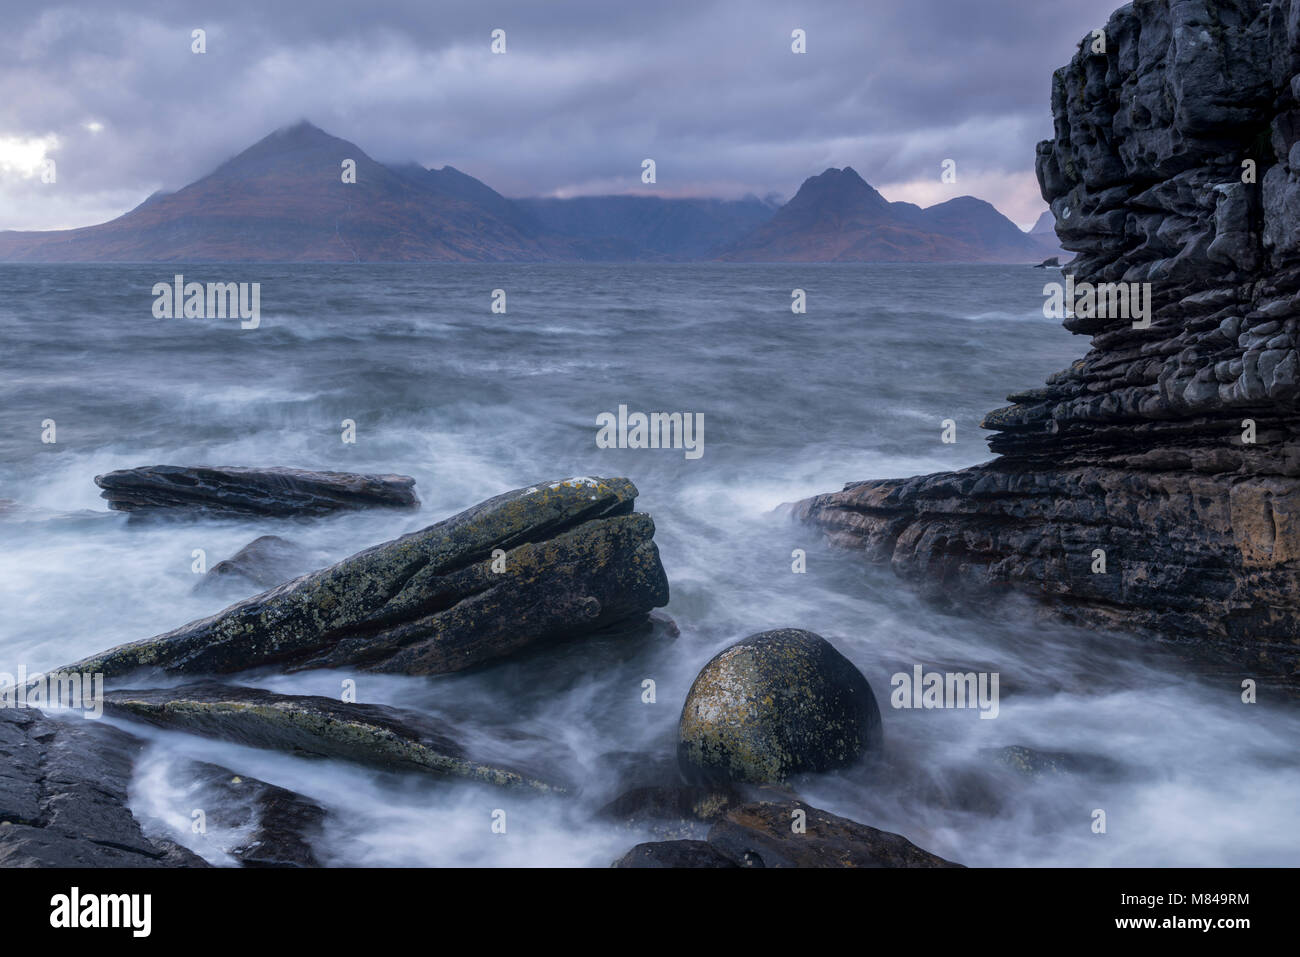 The Cuillin mountains from the rocky seashore at Elgol, Isle of Skye, Scotland. Autumn (November) 2017. Stock Photo